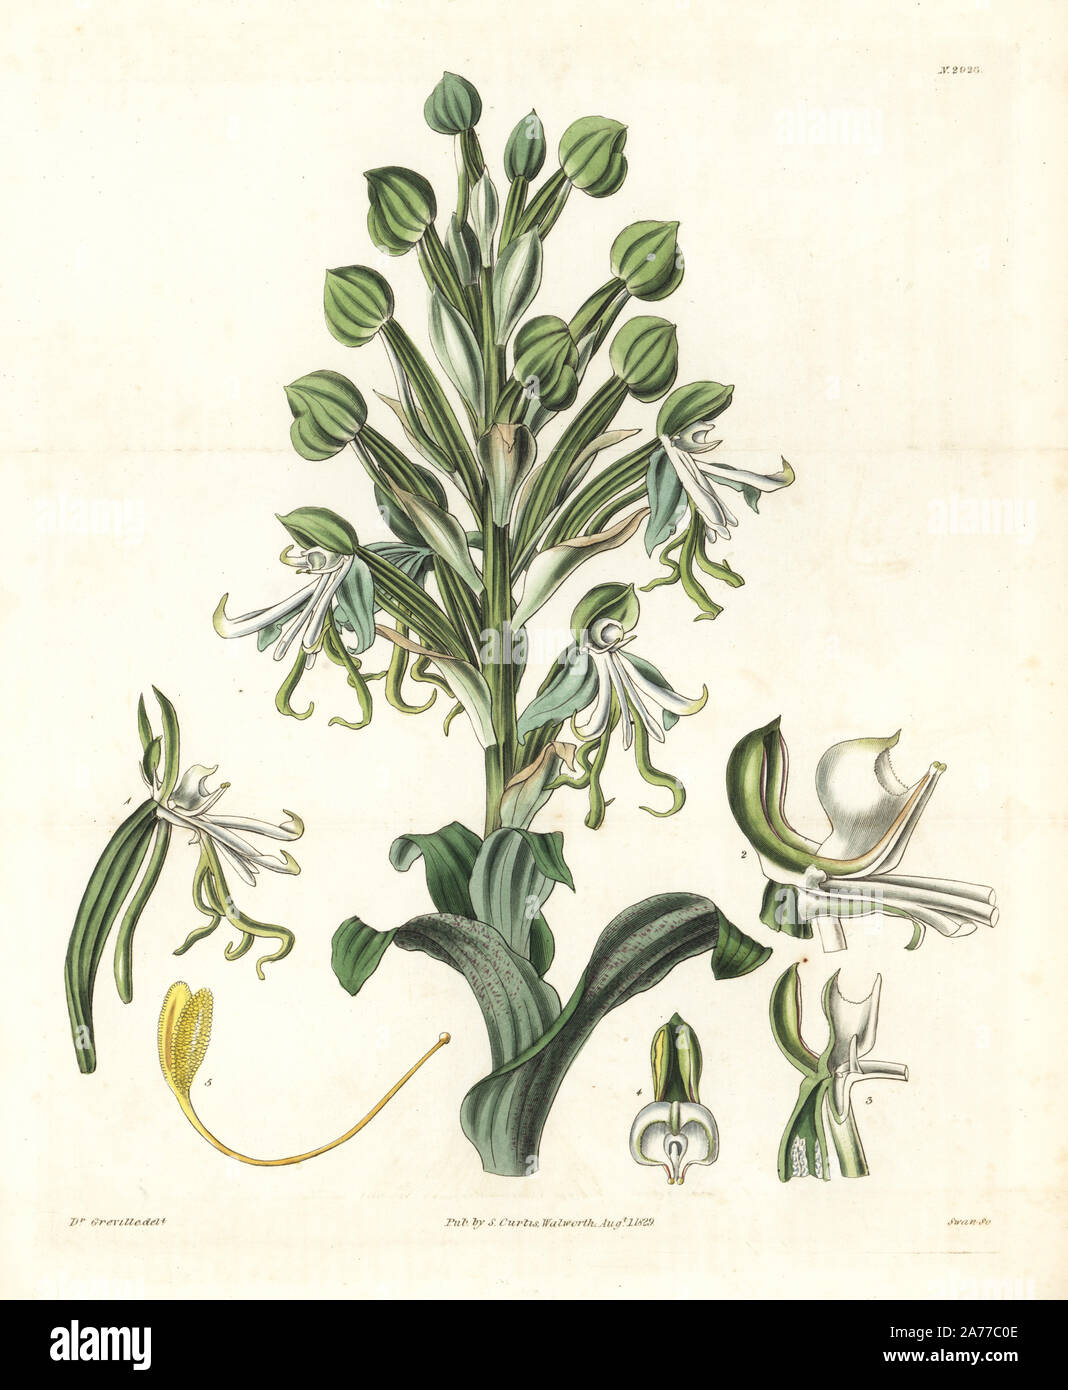 Beautiful or showy bonatea orchid, Bonatea speciosa. Handcoloured copperplate engraving by Swan after an illustration by Dr. Greville from Samuel Curtis's 'Botanical Magazine,' London, 1829. Stock Photo